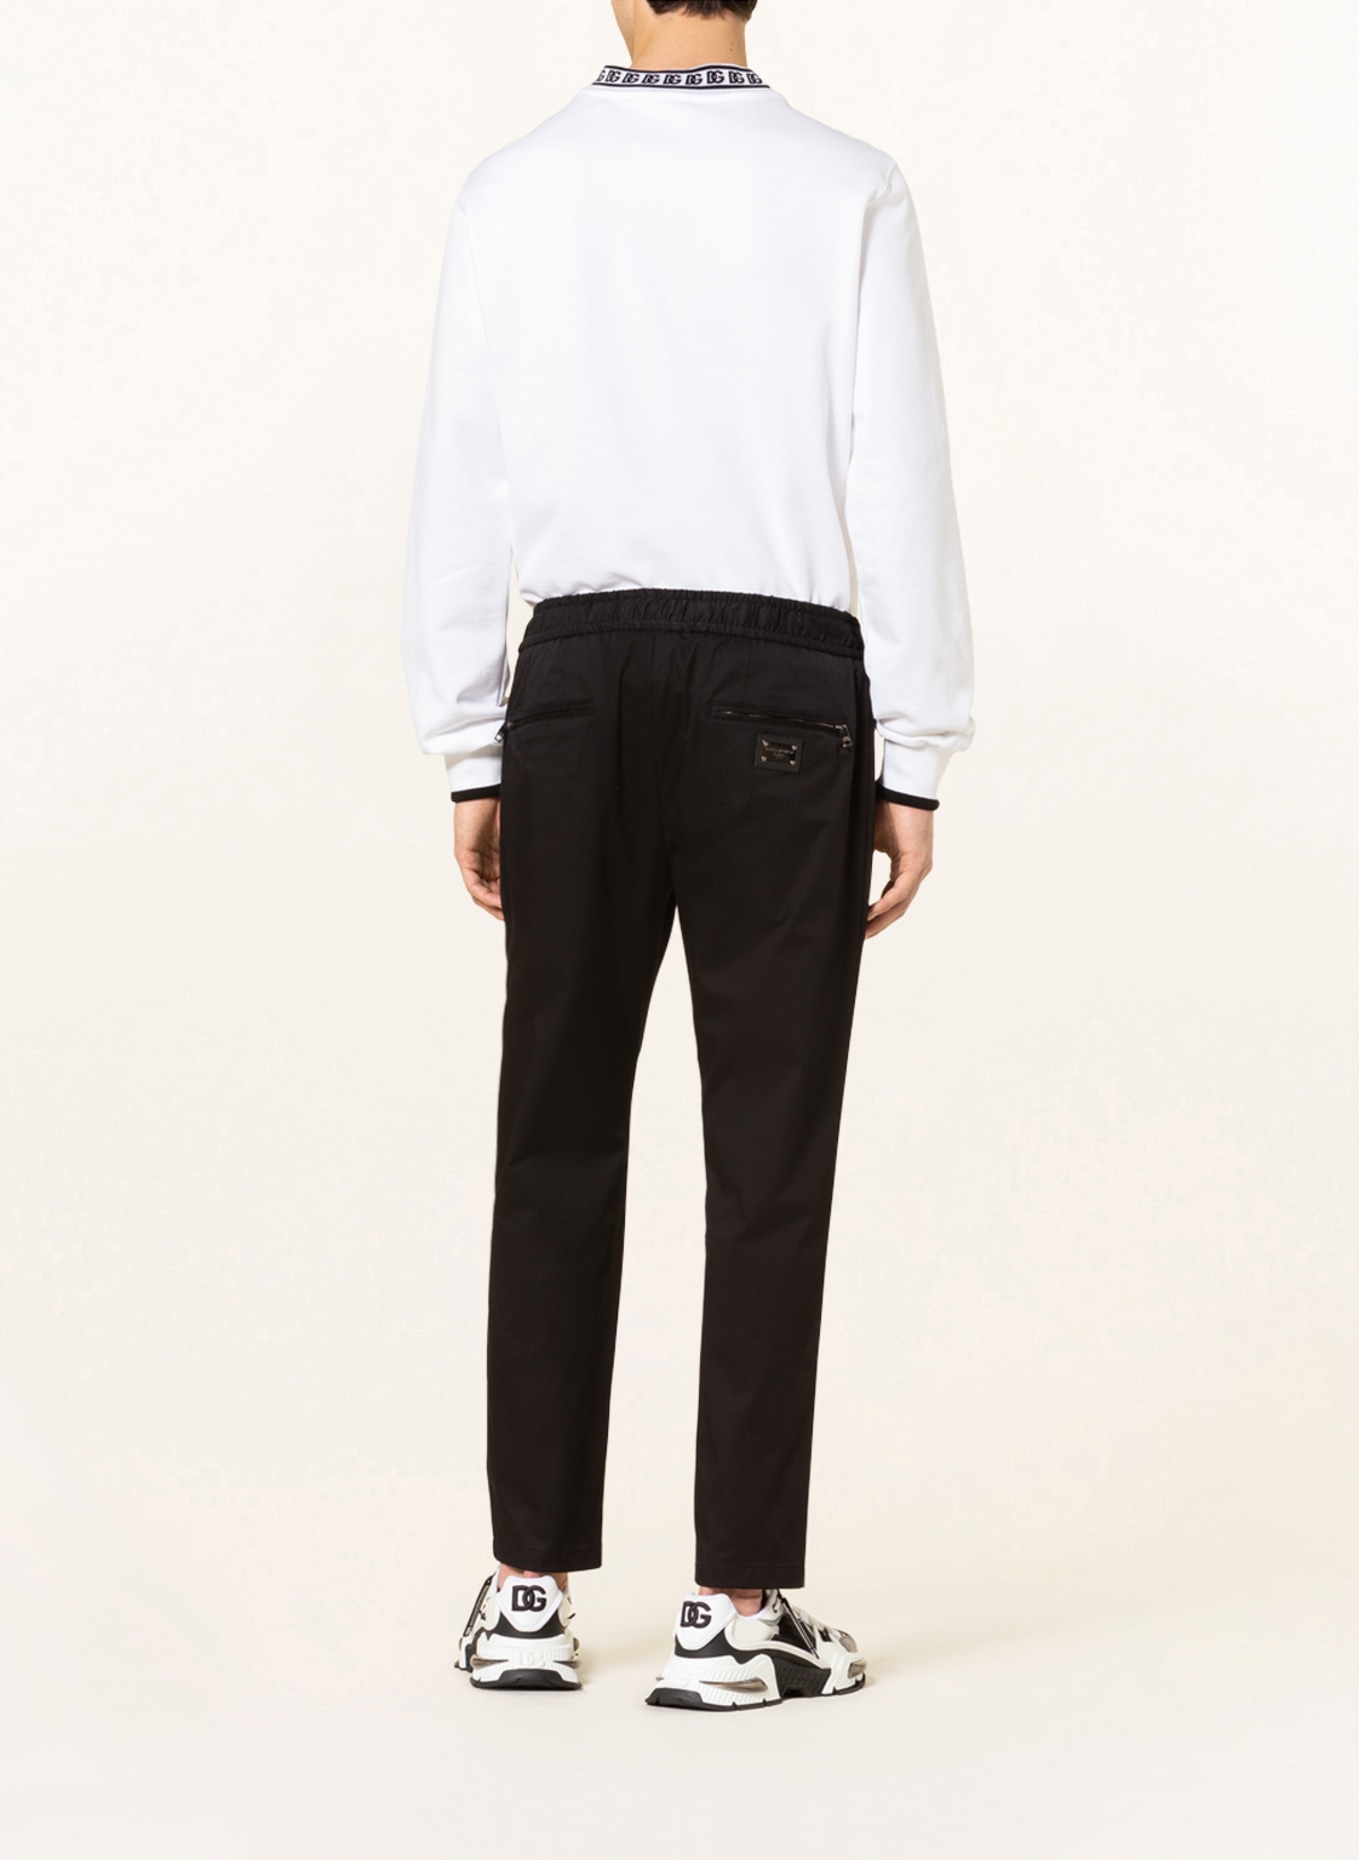 DOLCE & GABBANA Pants in jogger style extra slim fit , Color: BLACK (Image 3)